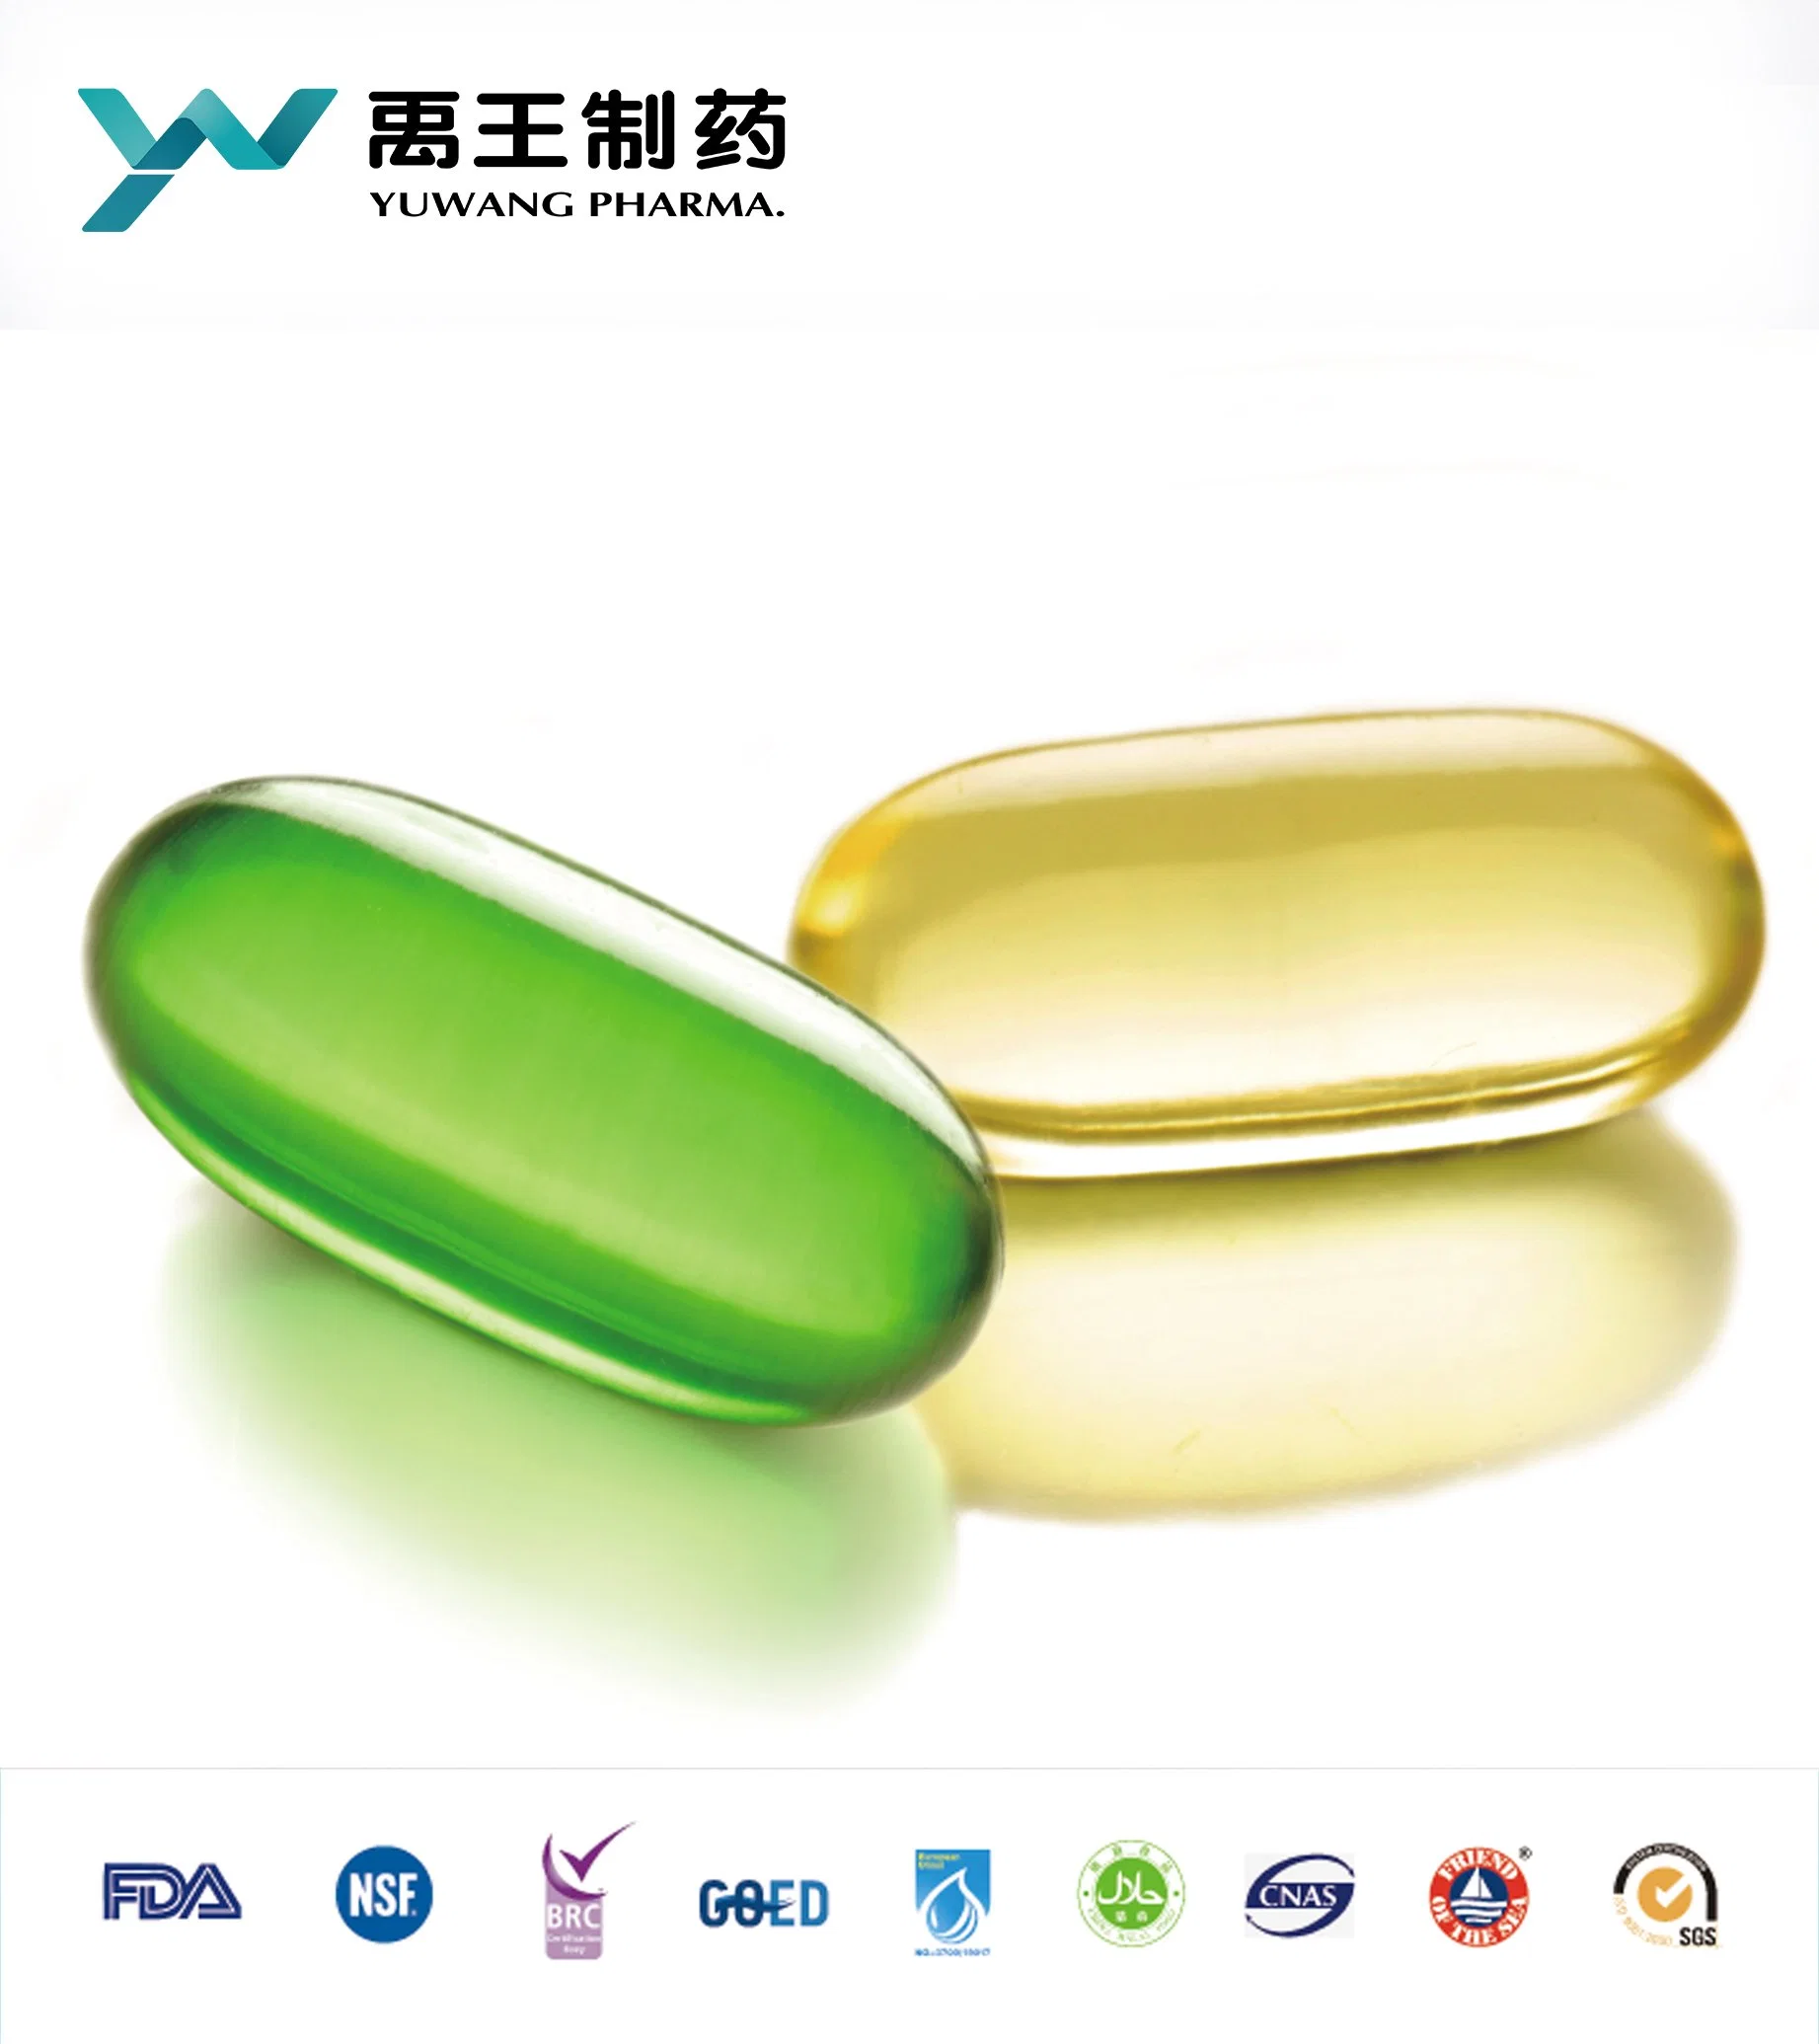 GMP Certified Supplements OEM Contract Manufacuturer-Yuwang Pharma